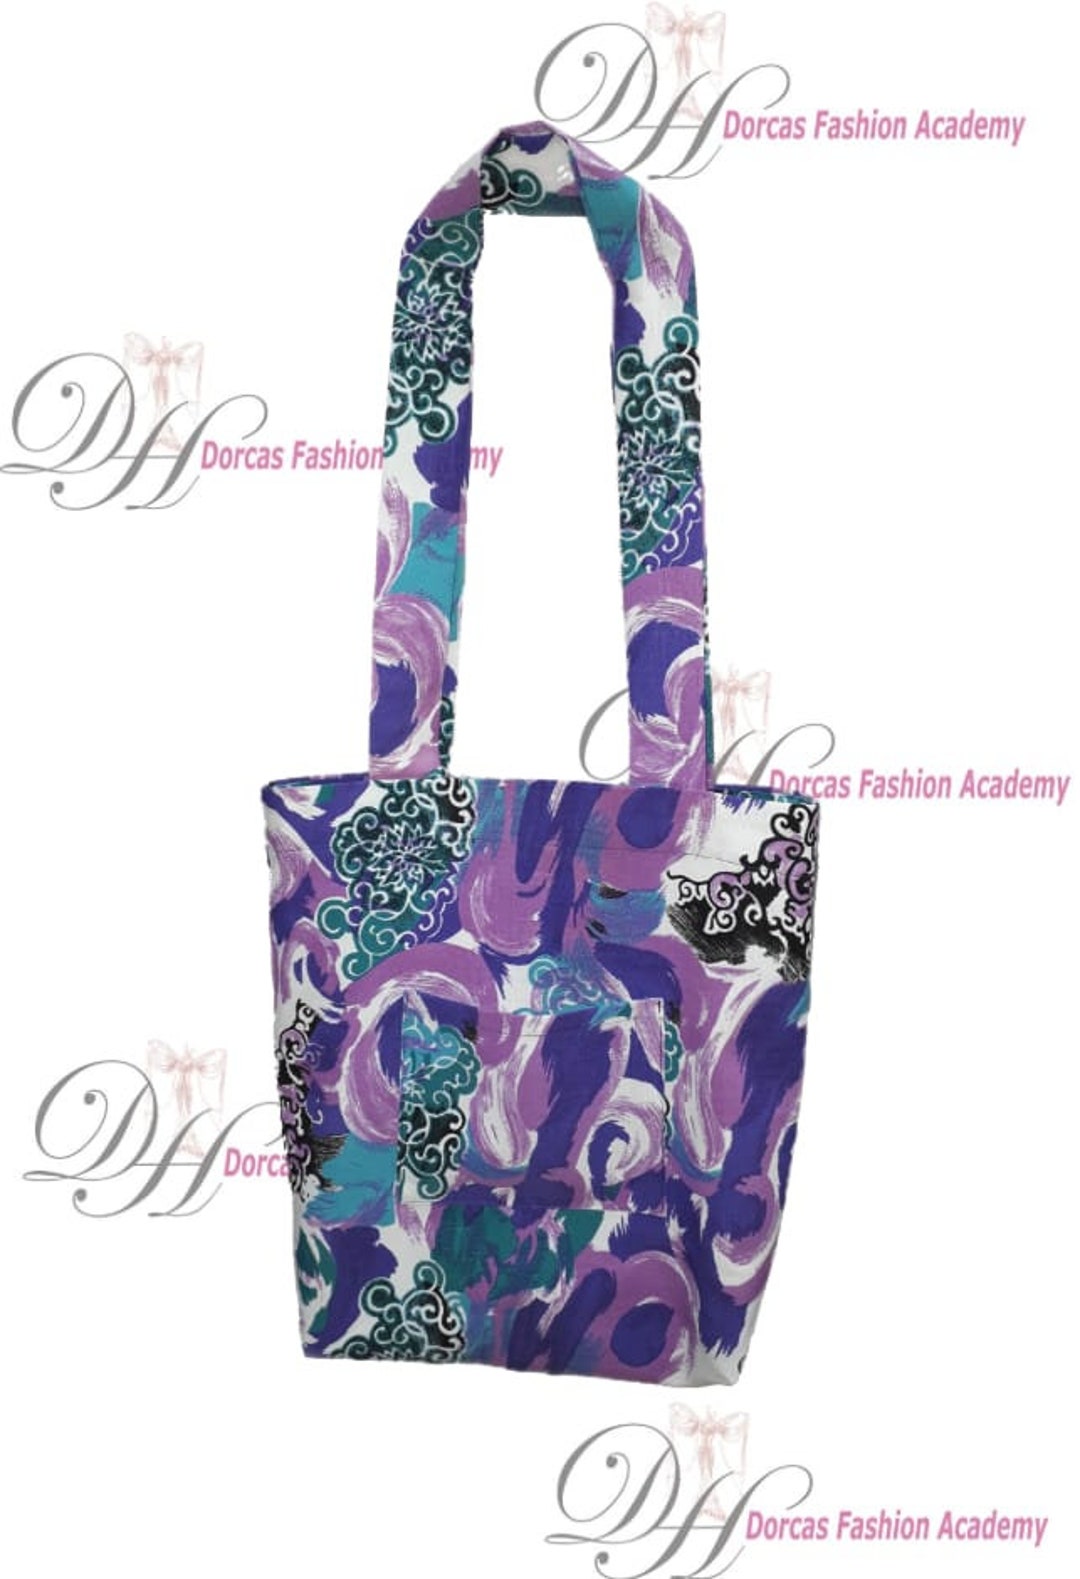 The Sew Easy Big Tote Bag - with a Zipper!